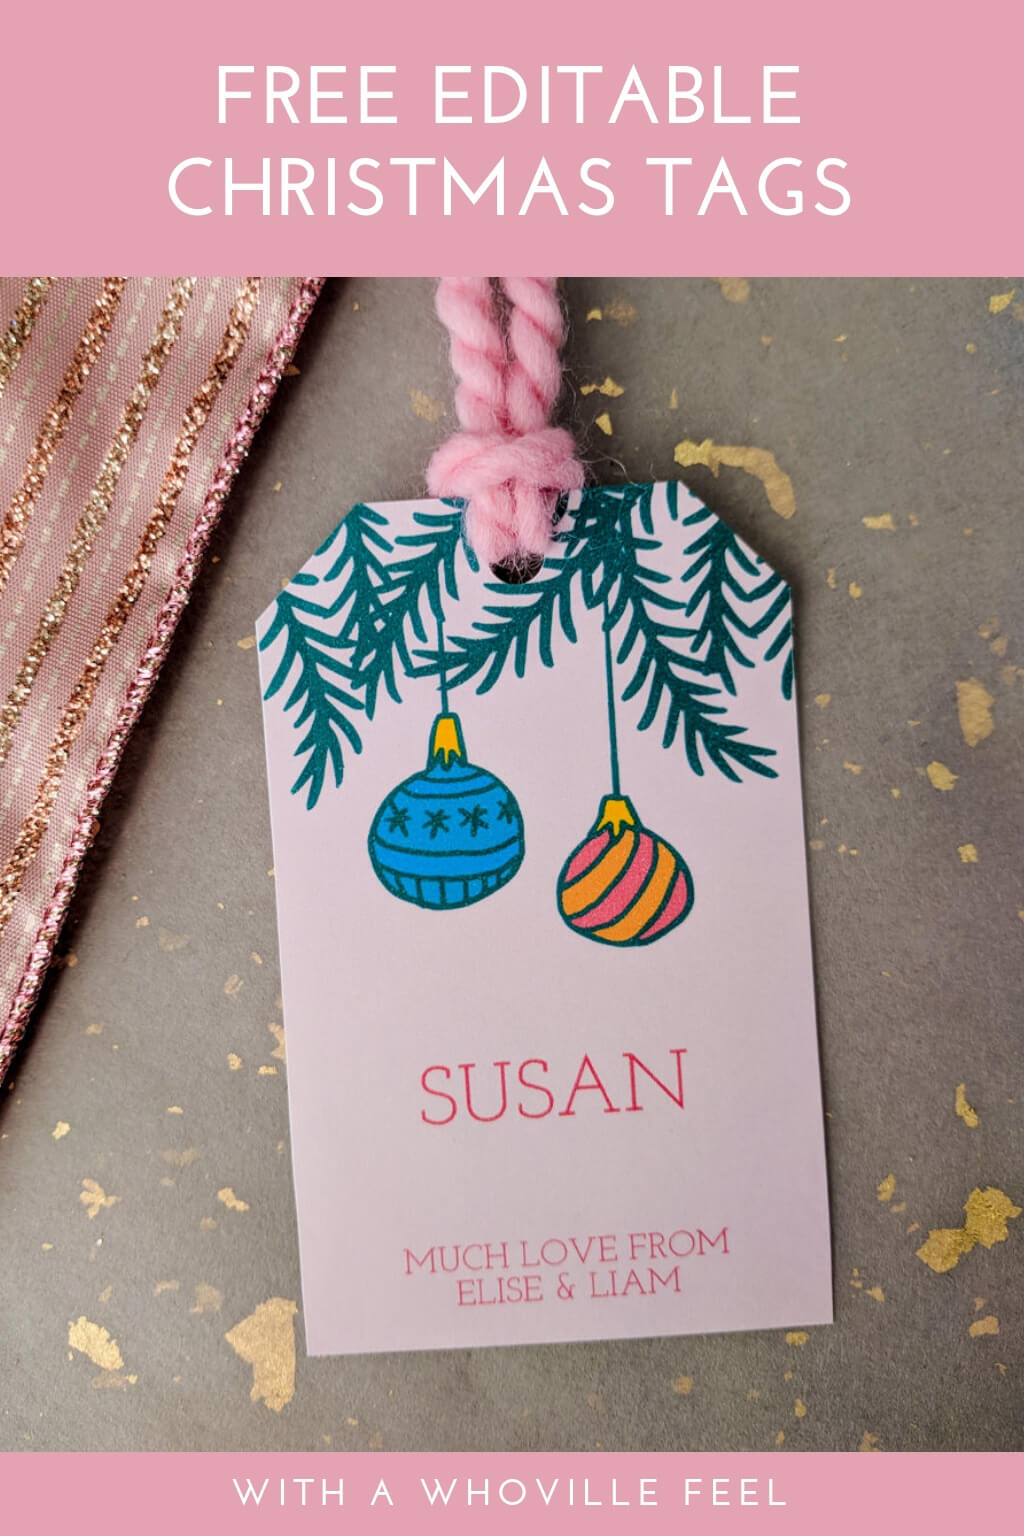 Free editable Christmas gift tags - in pink!